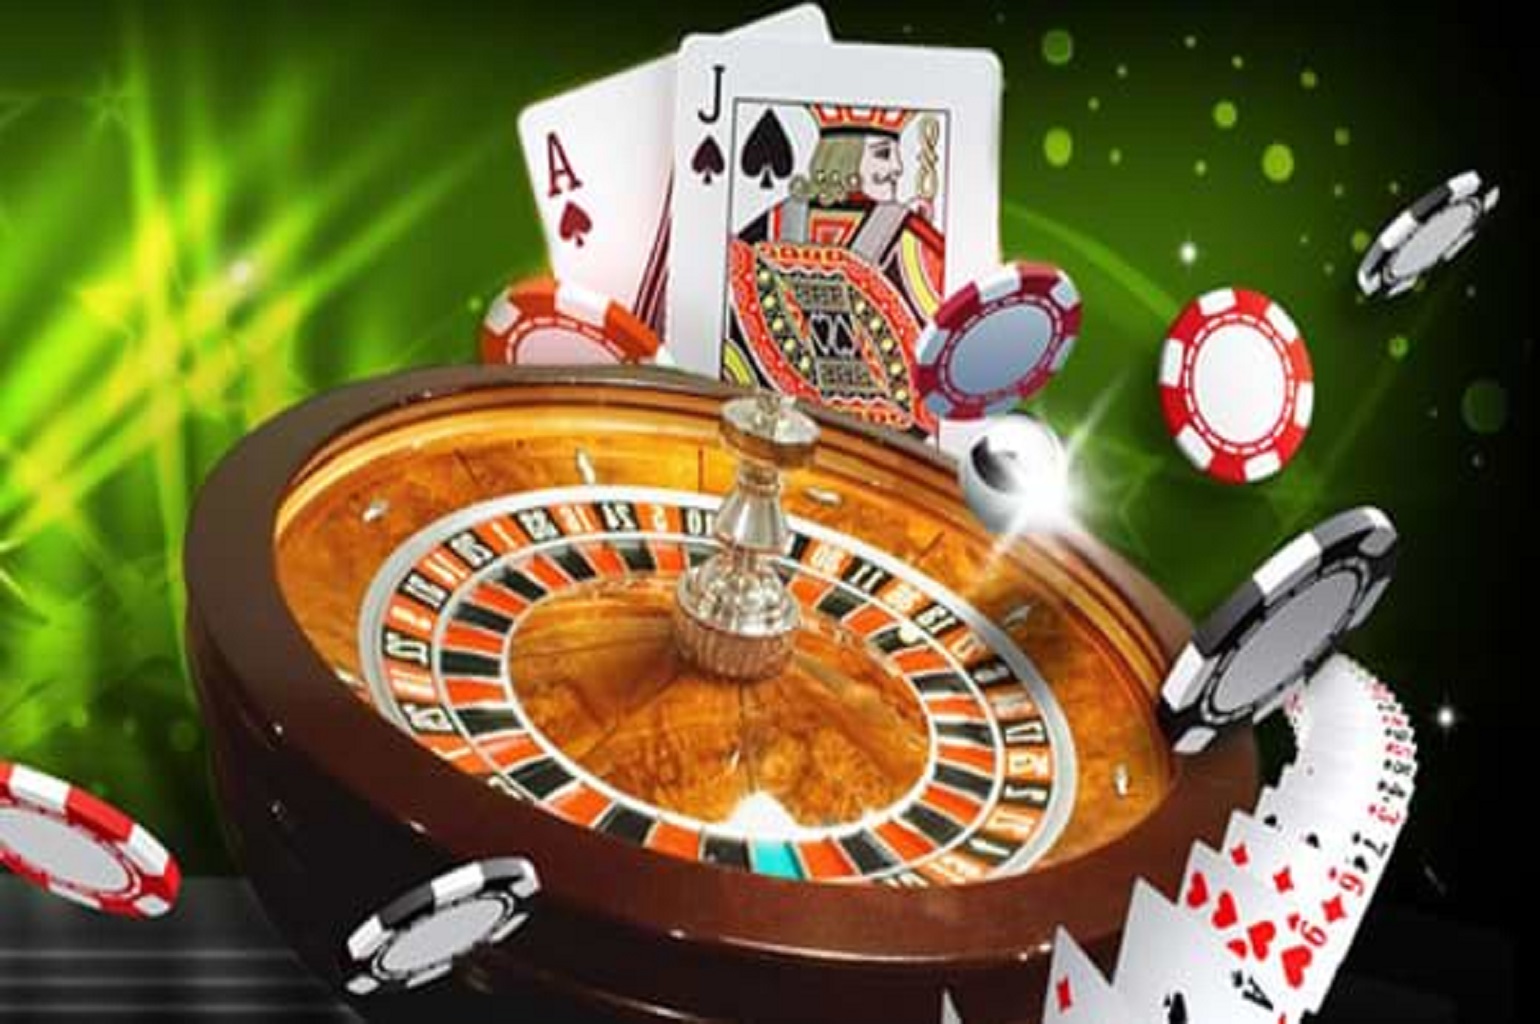 Play Smart In Casino Games